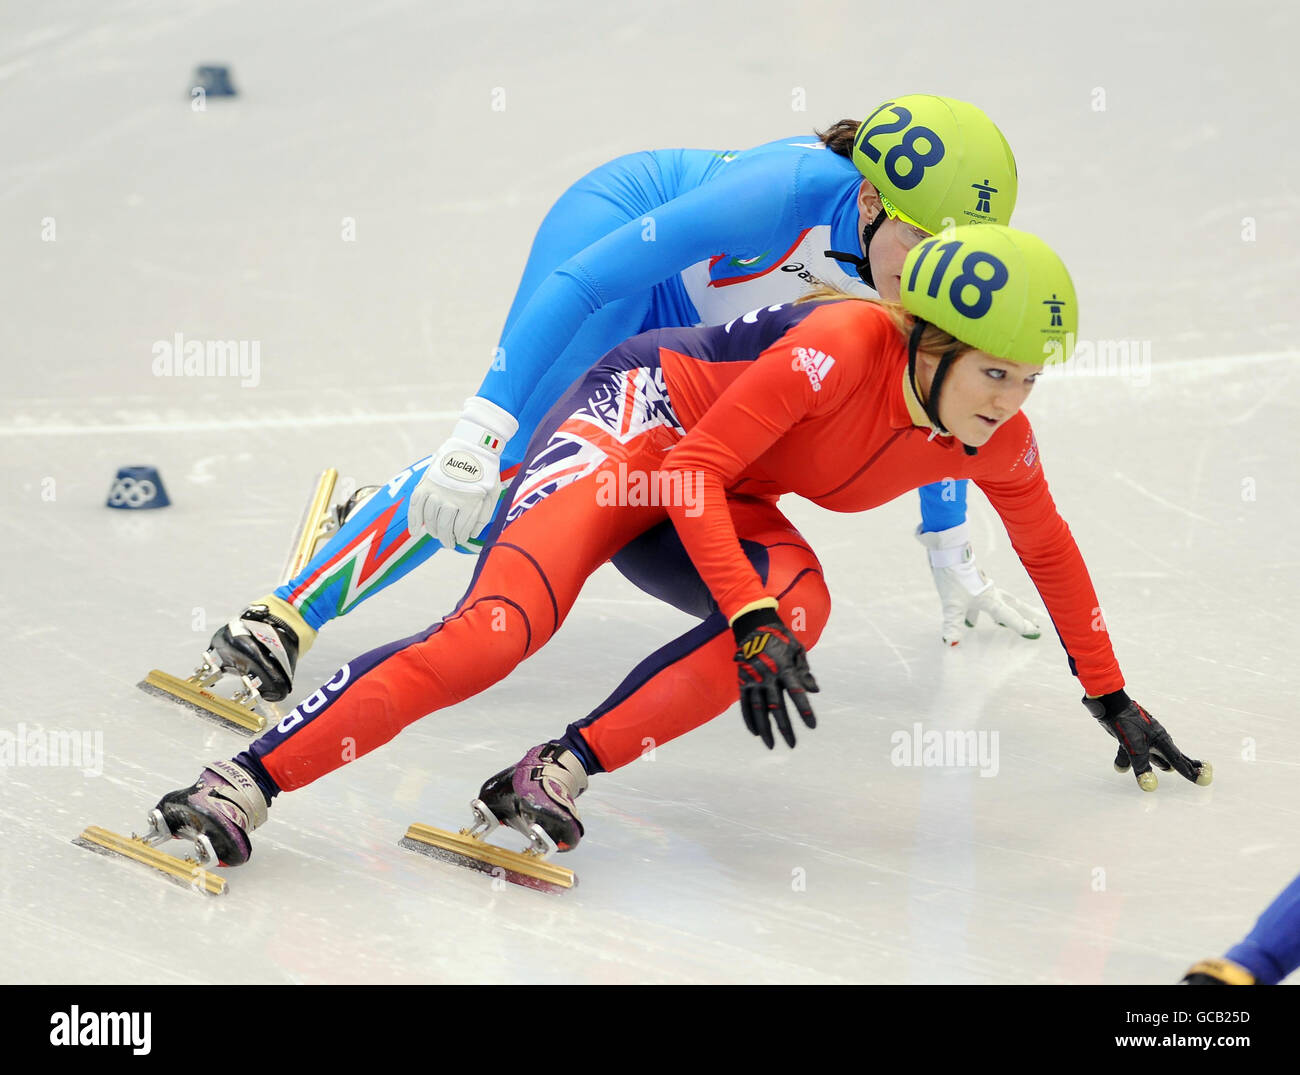 Great Britain's Elise Christie in action in her heat of the Women's 1500m short-track skating competition at the Pacific Coliseum, Vancouver, part of the 2010 Winter Olympic Games Vancouver. Stock Photo